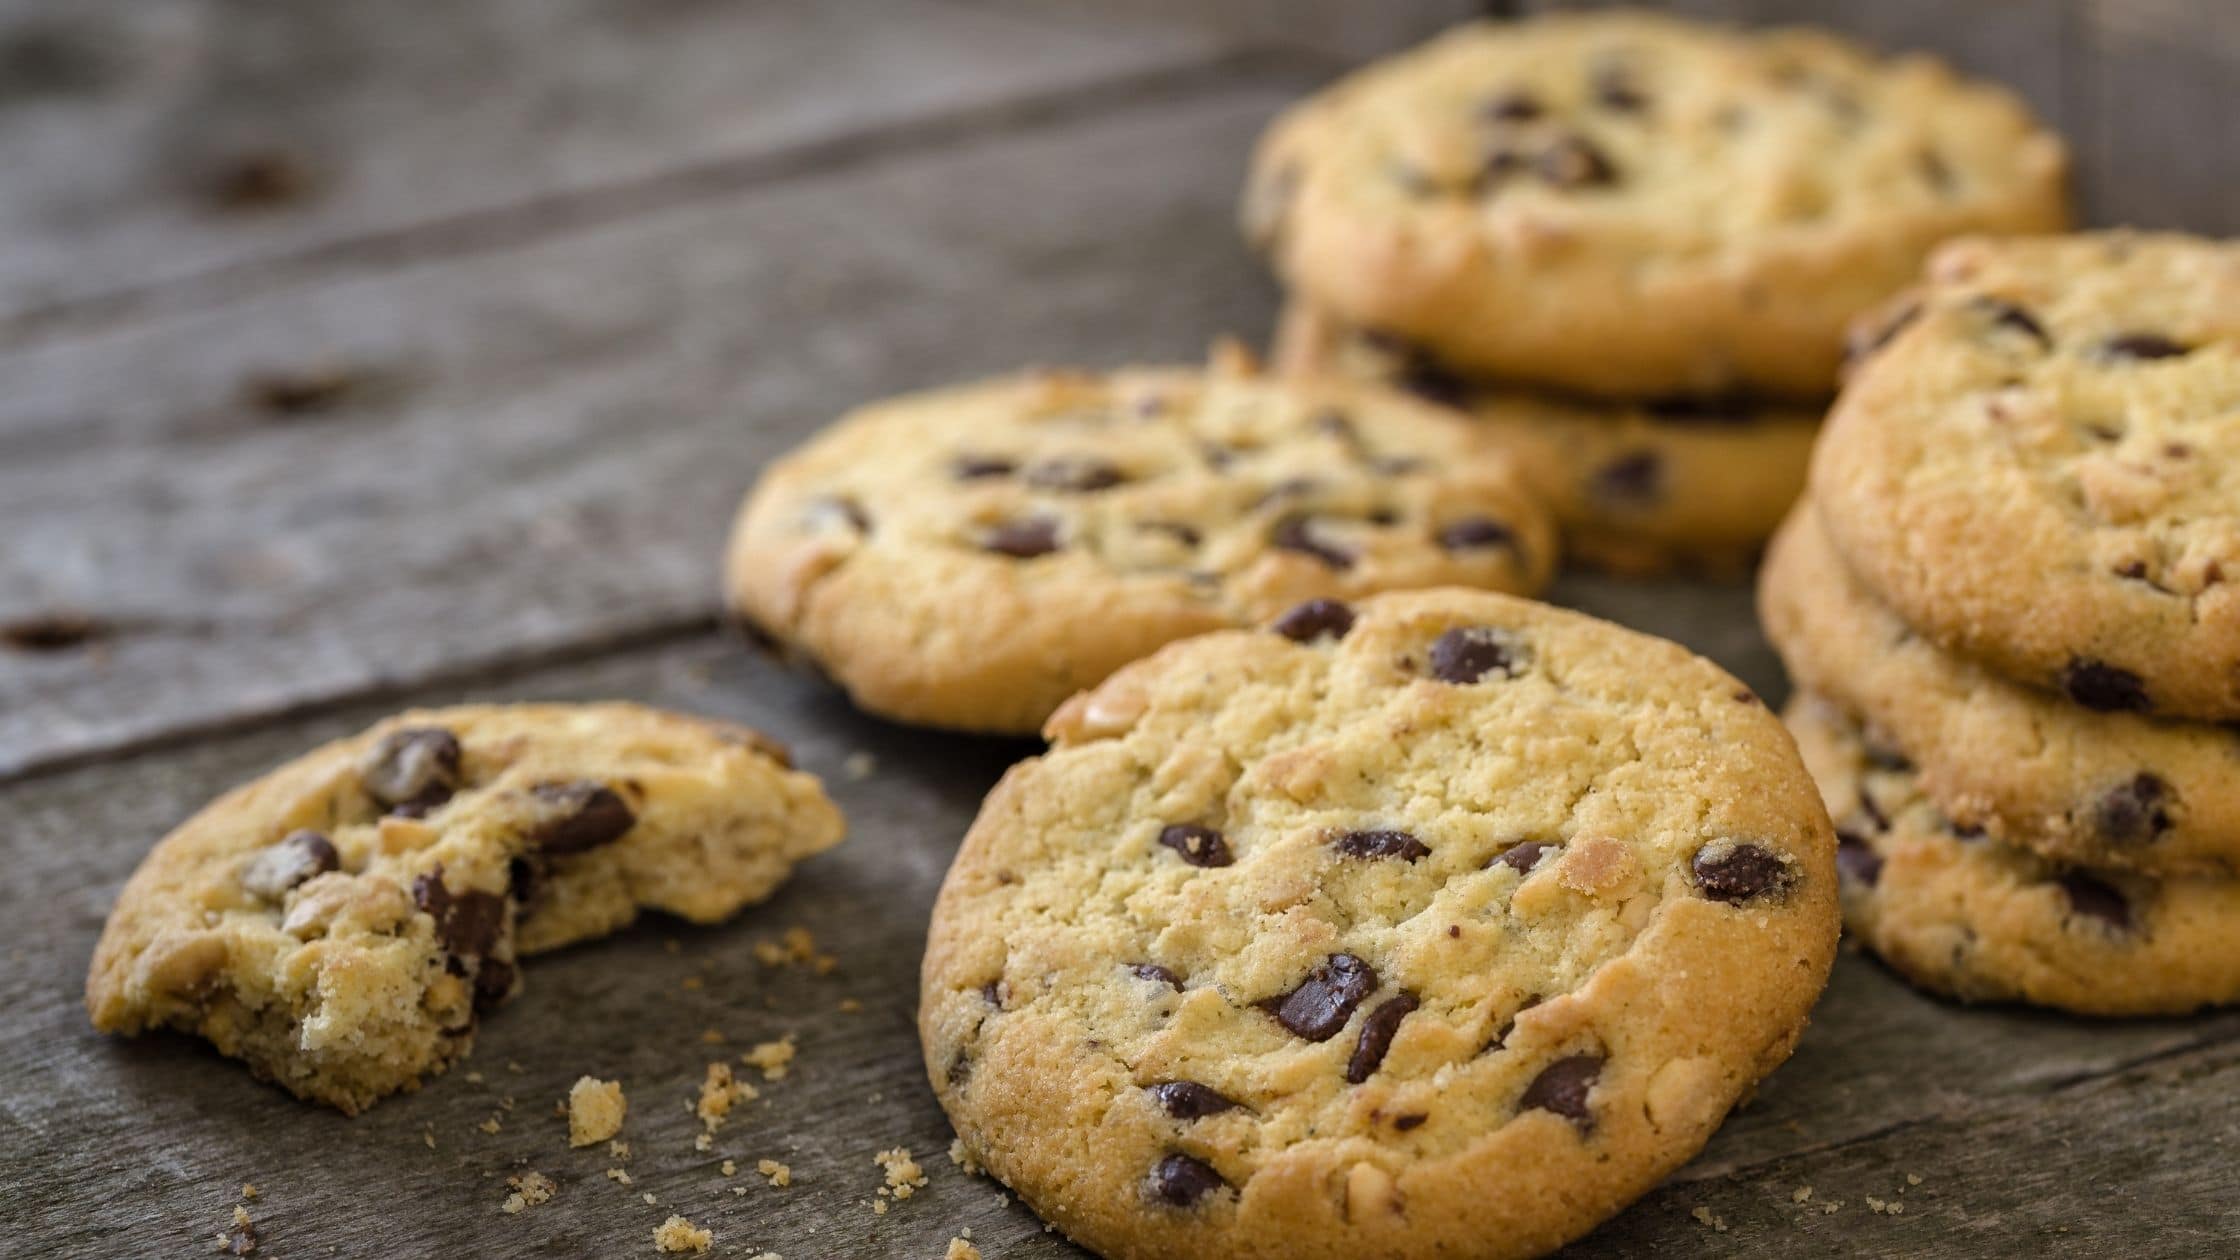 How to prepare your ecommerce site for a Cookieless internet